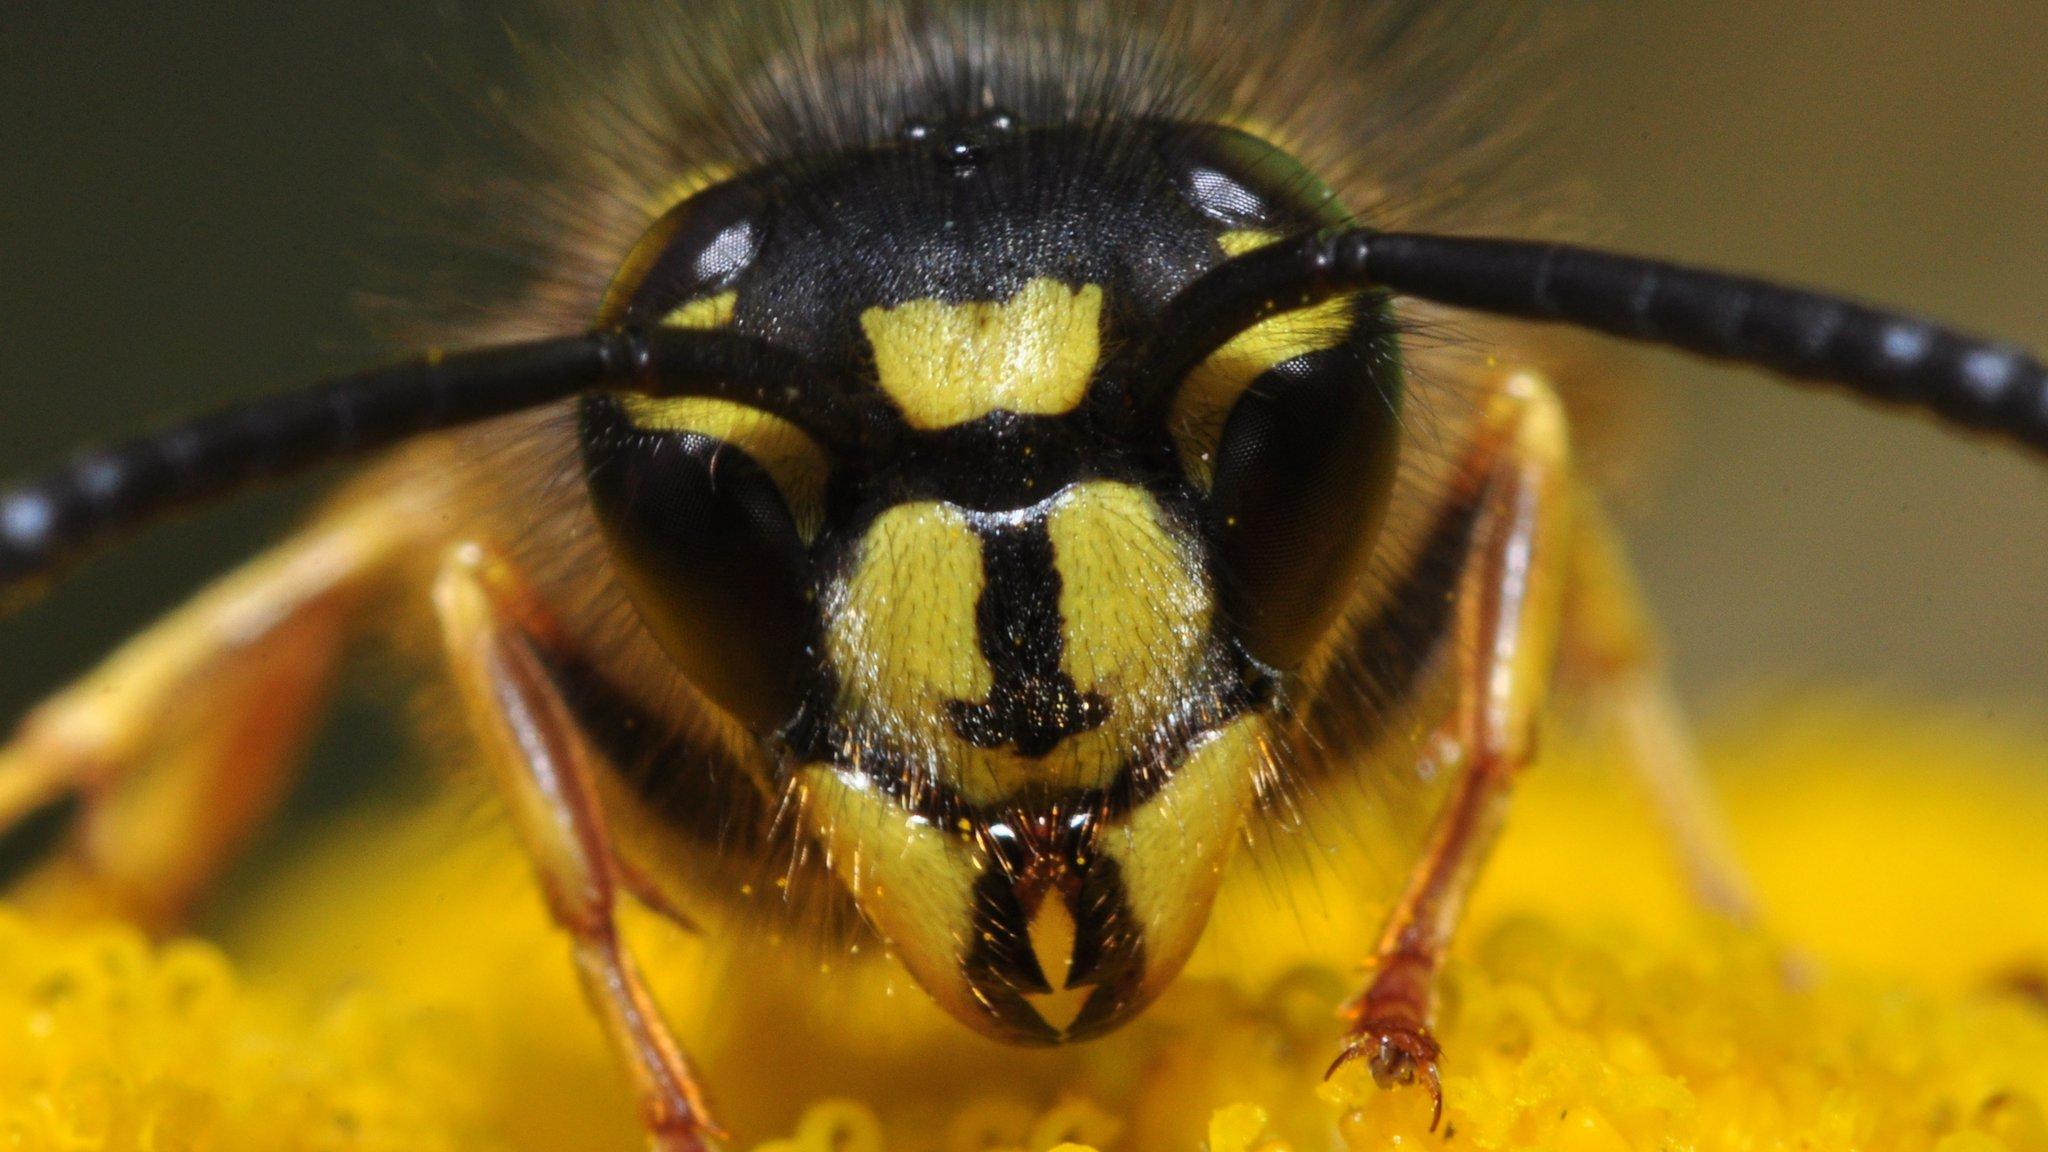 What's the difference between wasps, bees and hornets